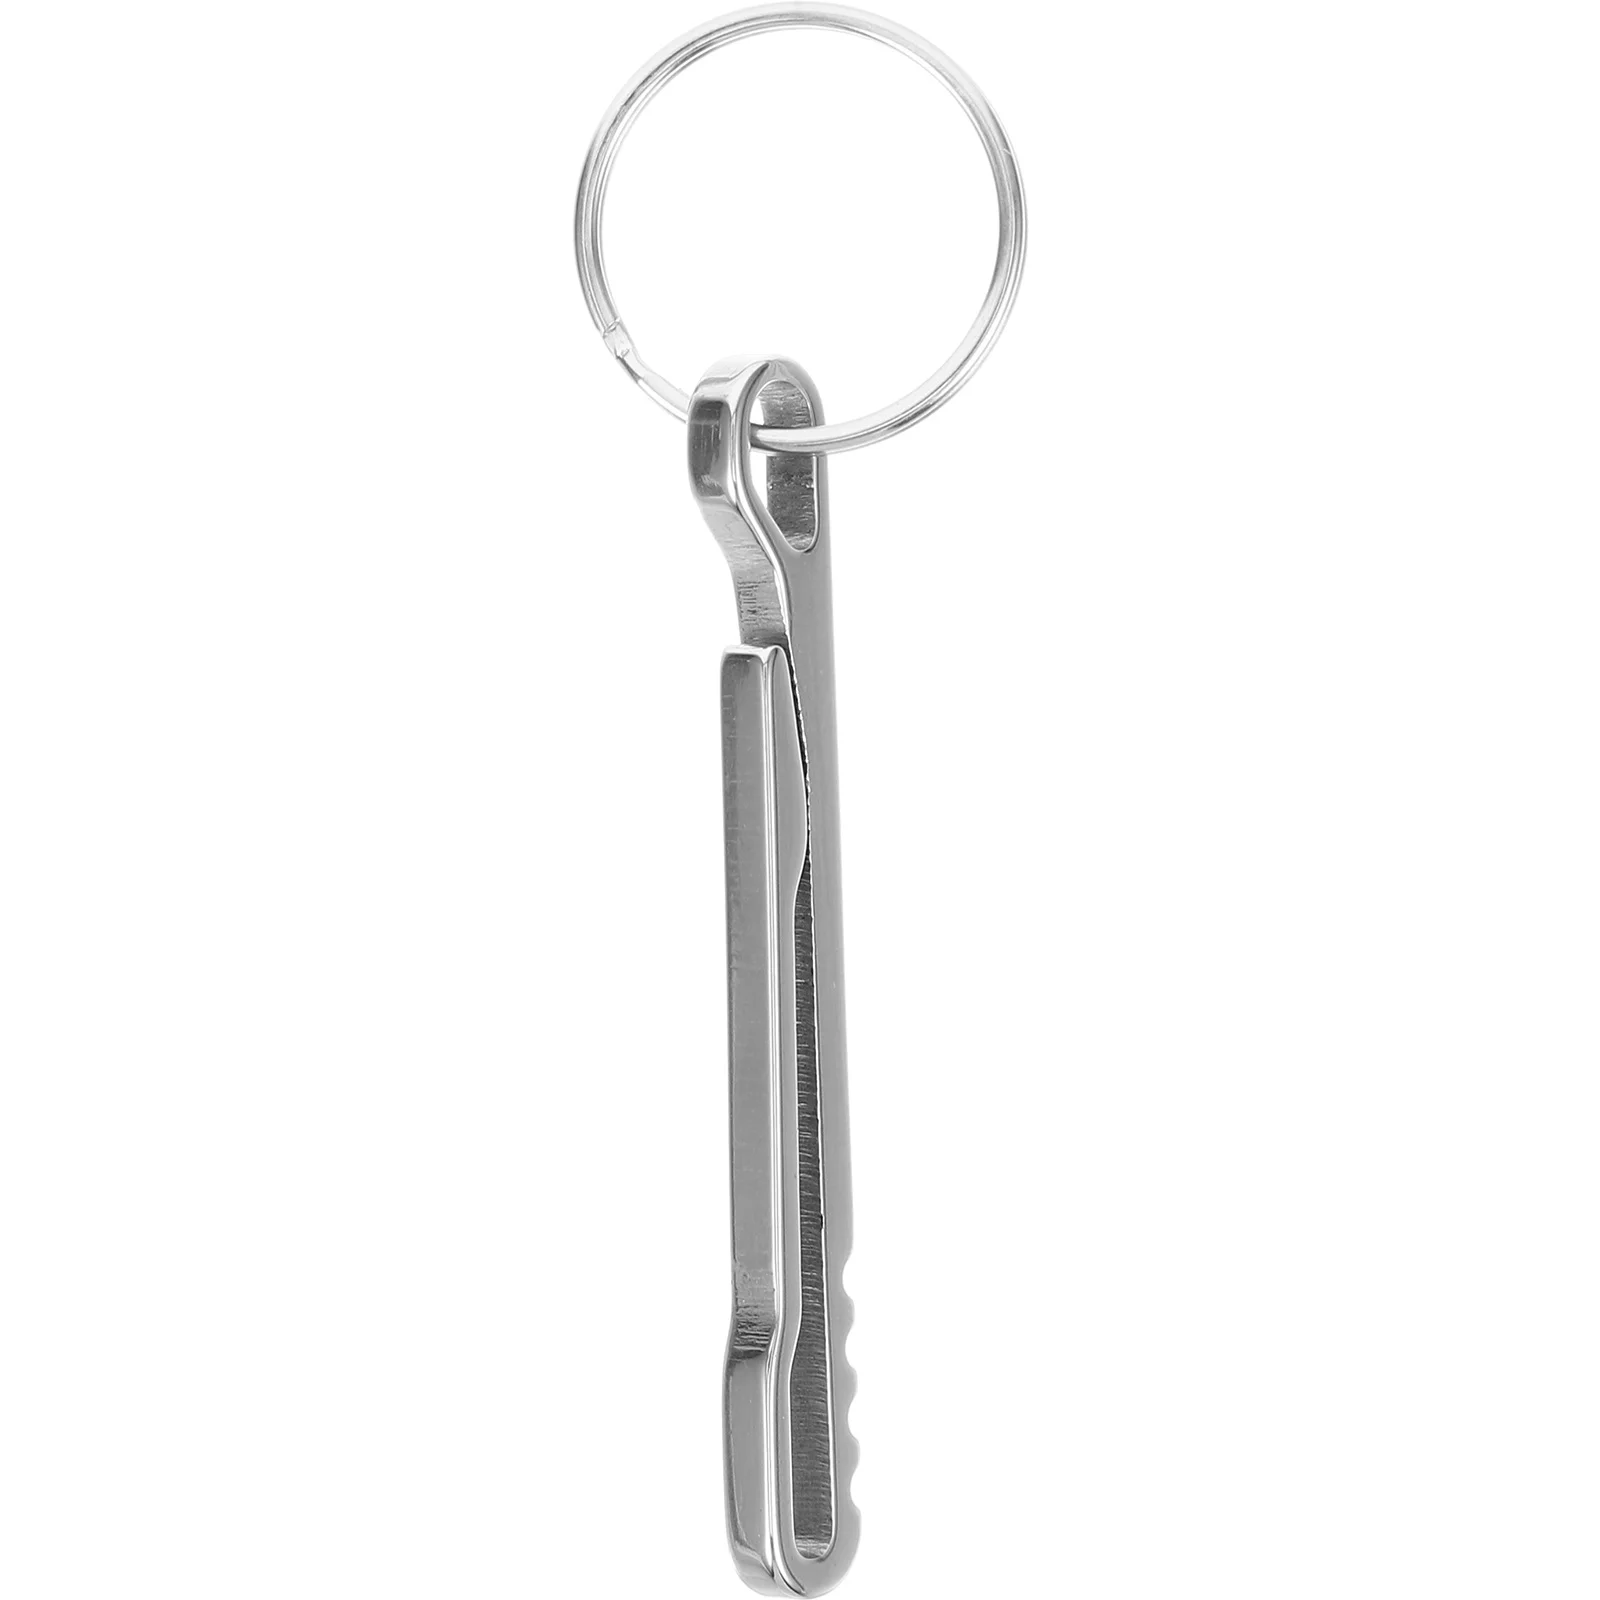 

Money Storage Clamp Key Fob Carry Small Keyring Cash Metal Bill Fixing Office